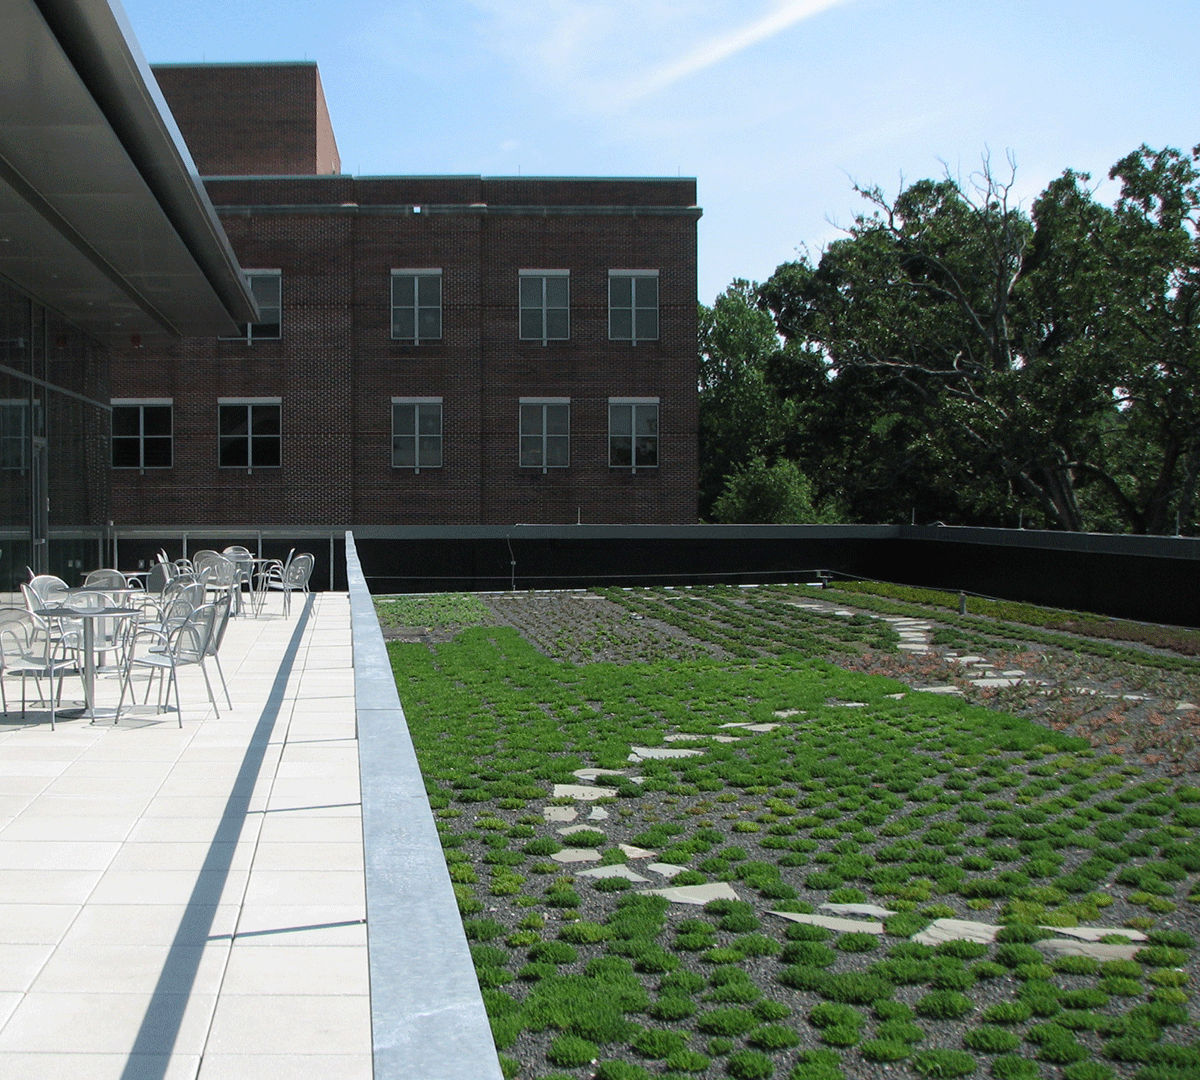 Image taken on top of one of the green roofs on campus. There is a paved patio with a grass area that has stepping stones.